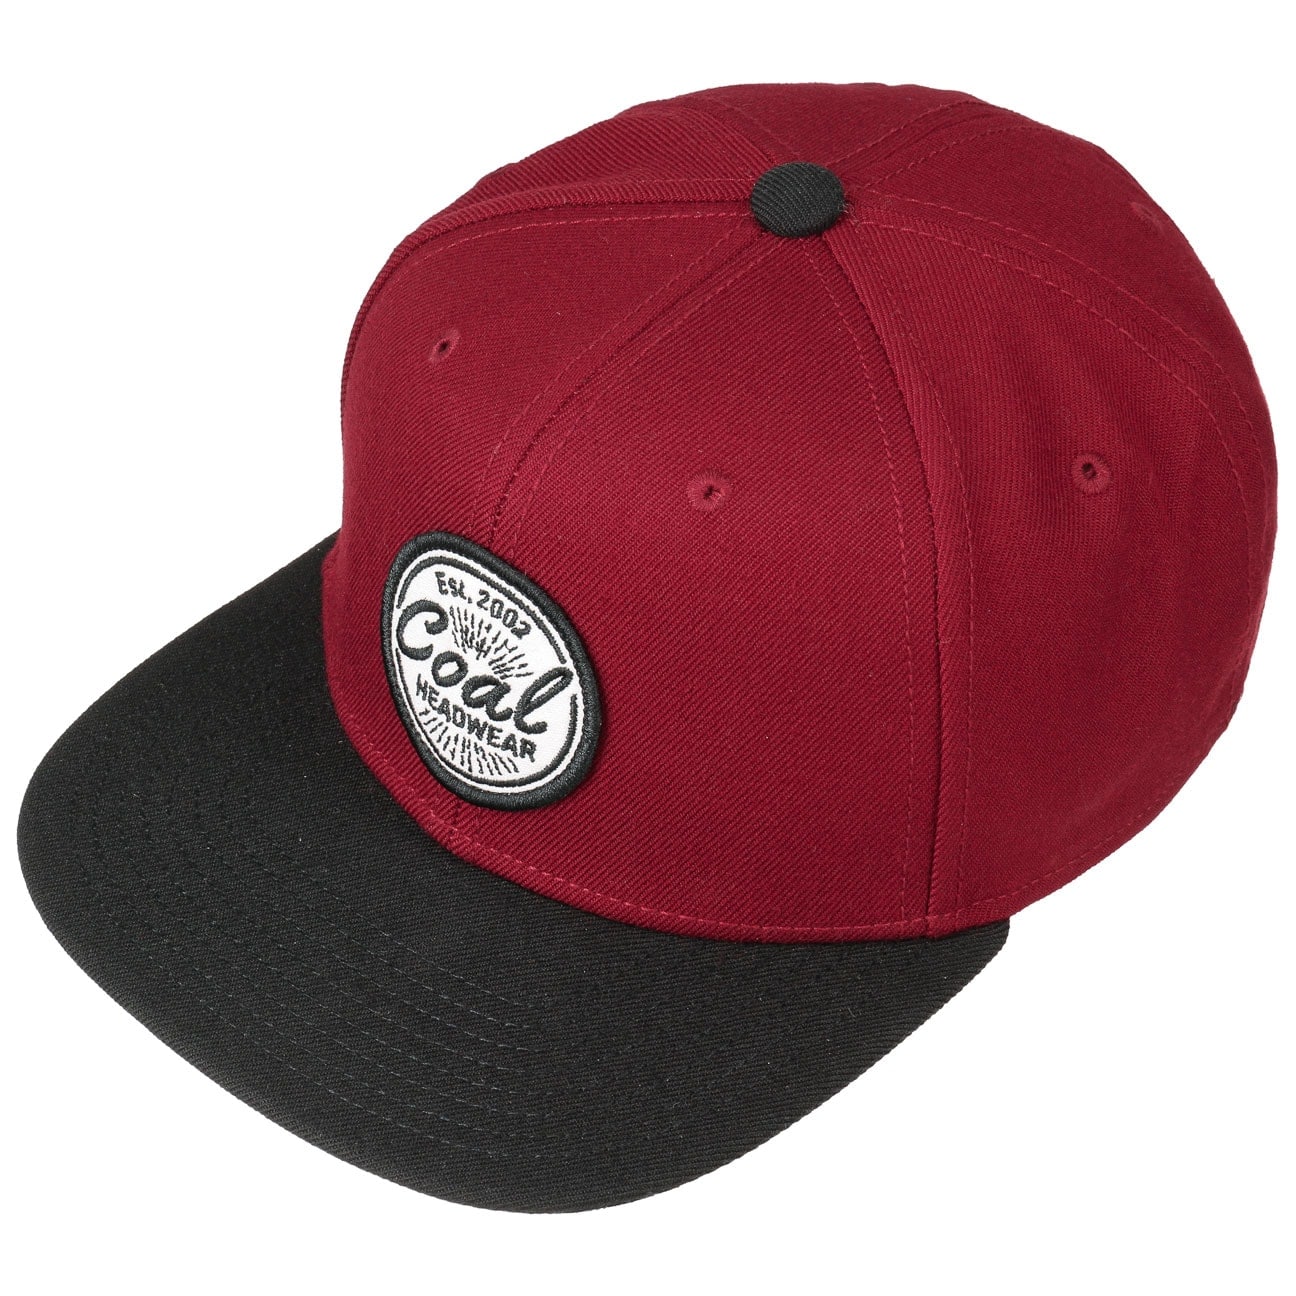 The Classic Snapback Cap by Coal - 18,95